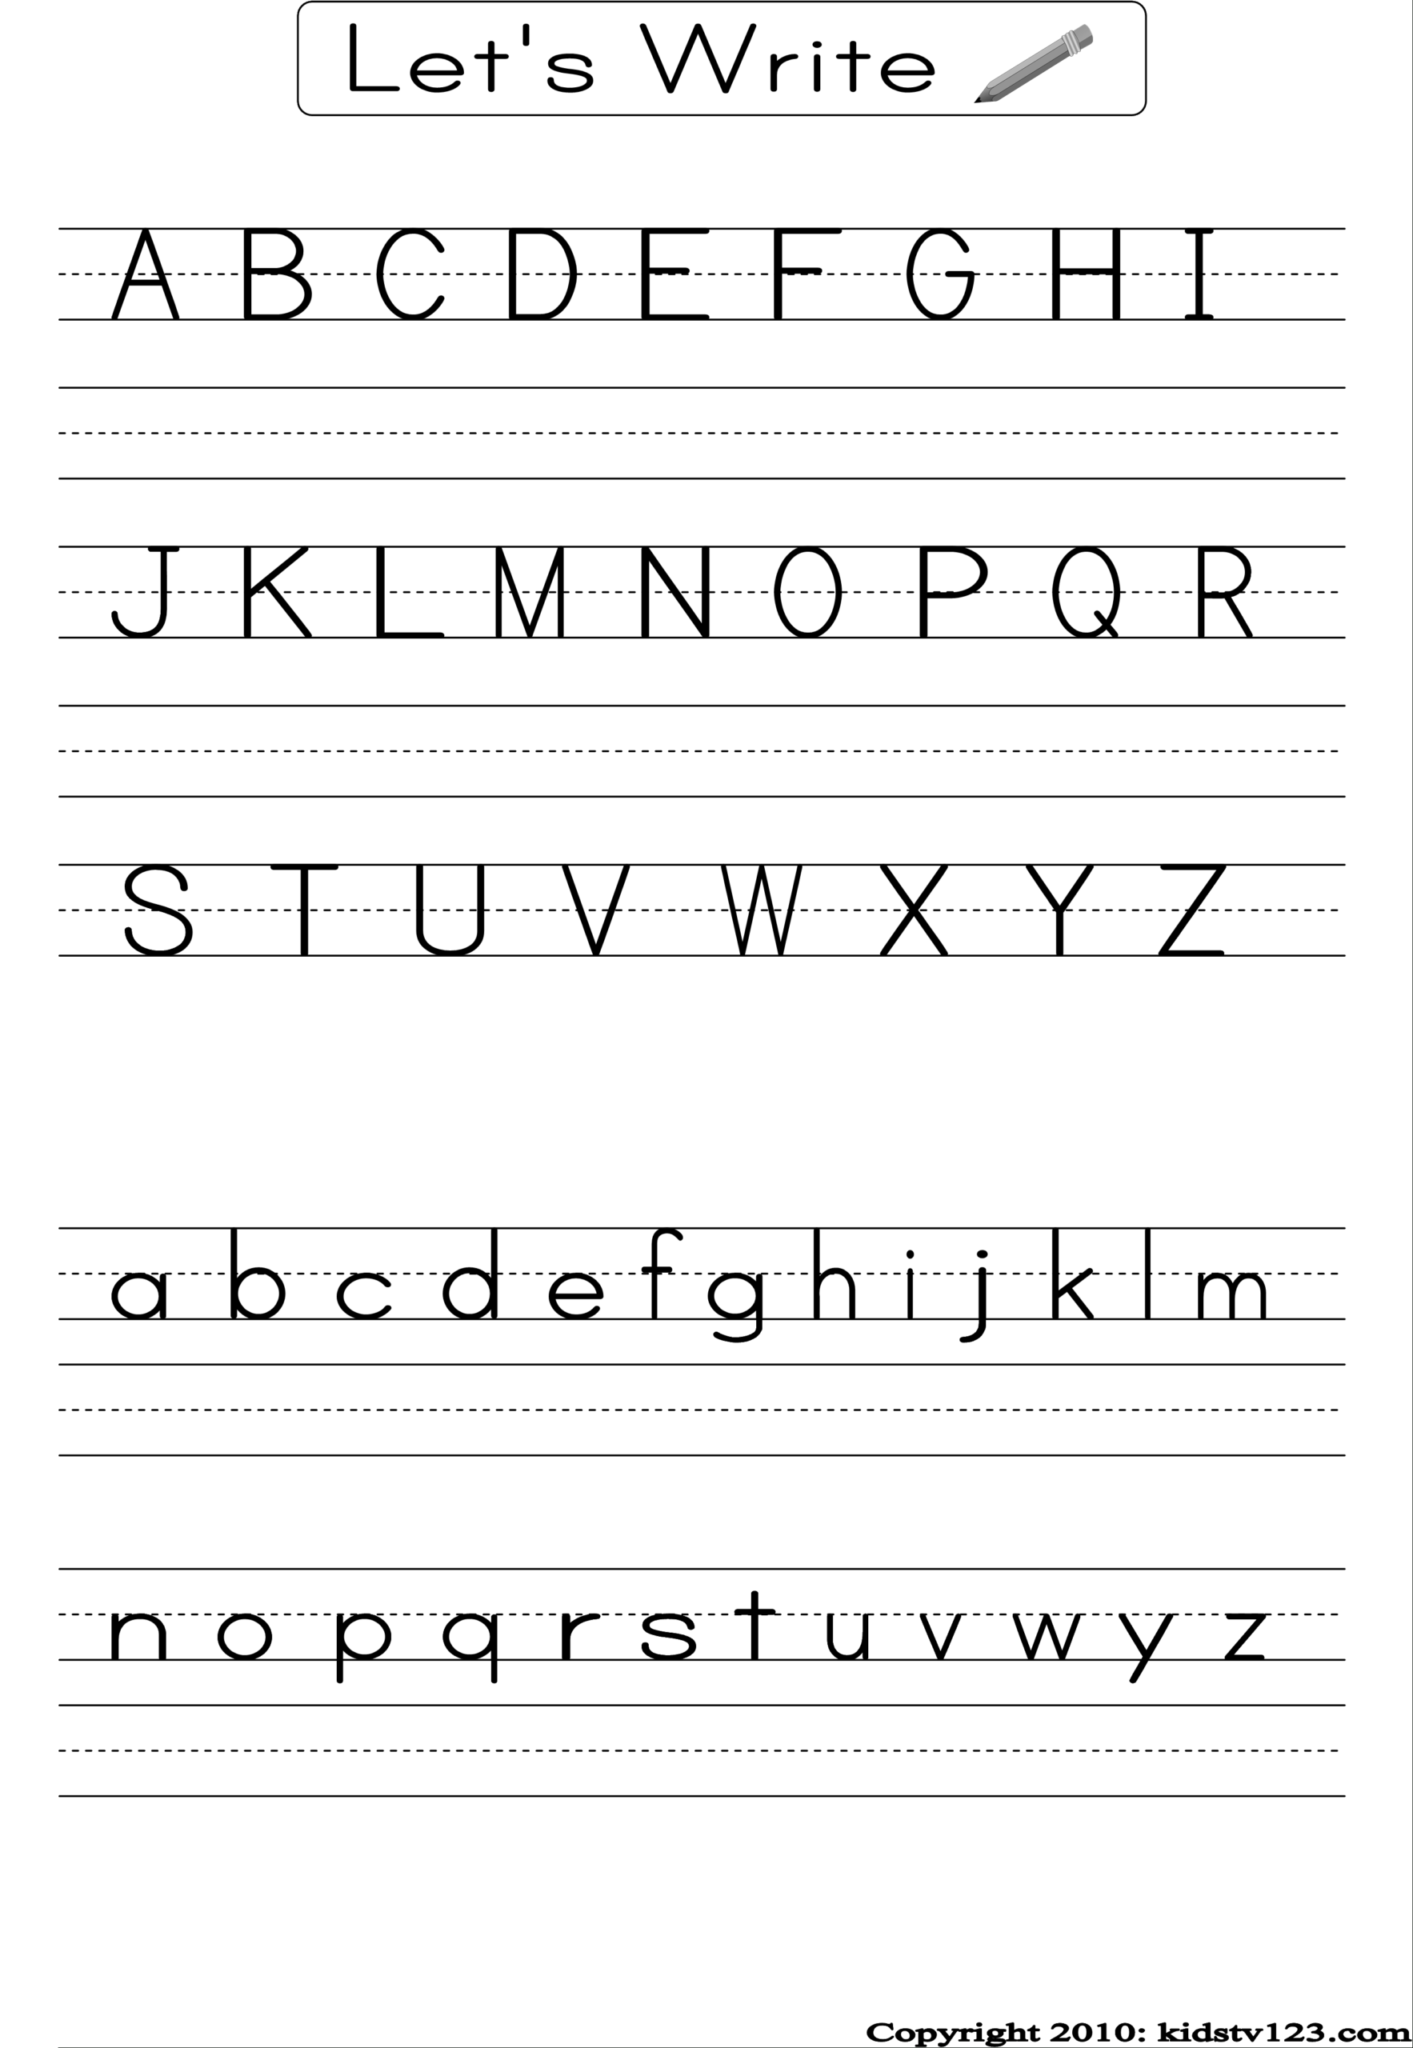 alphabet-handwriting-worksheets-a-to-z-for-preschool-to